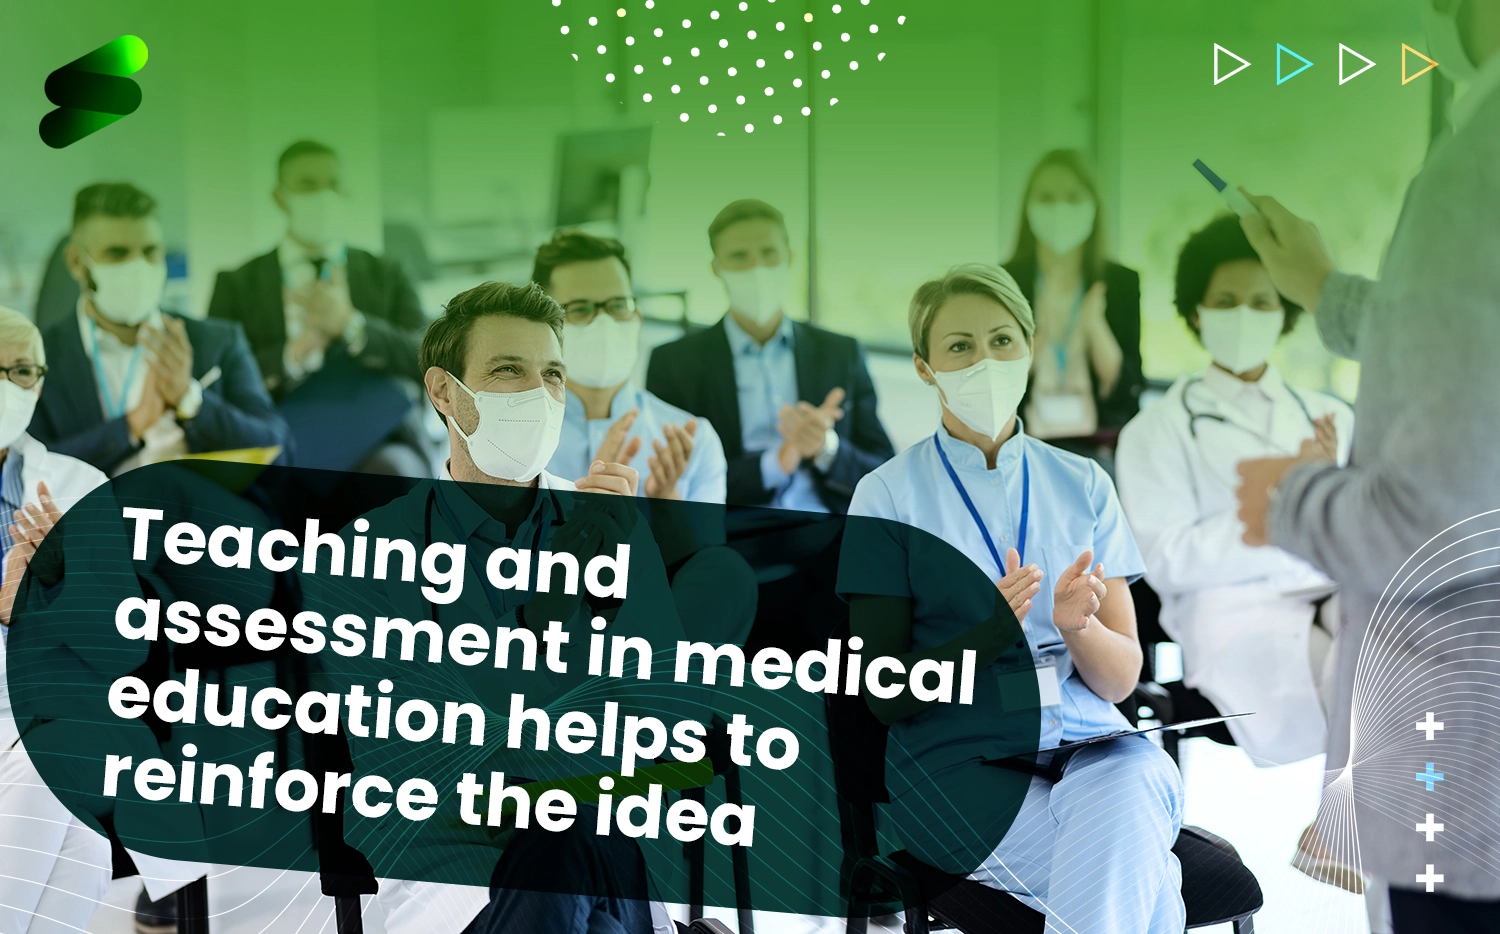 Teaching and assessment in medical education